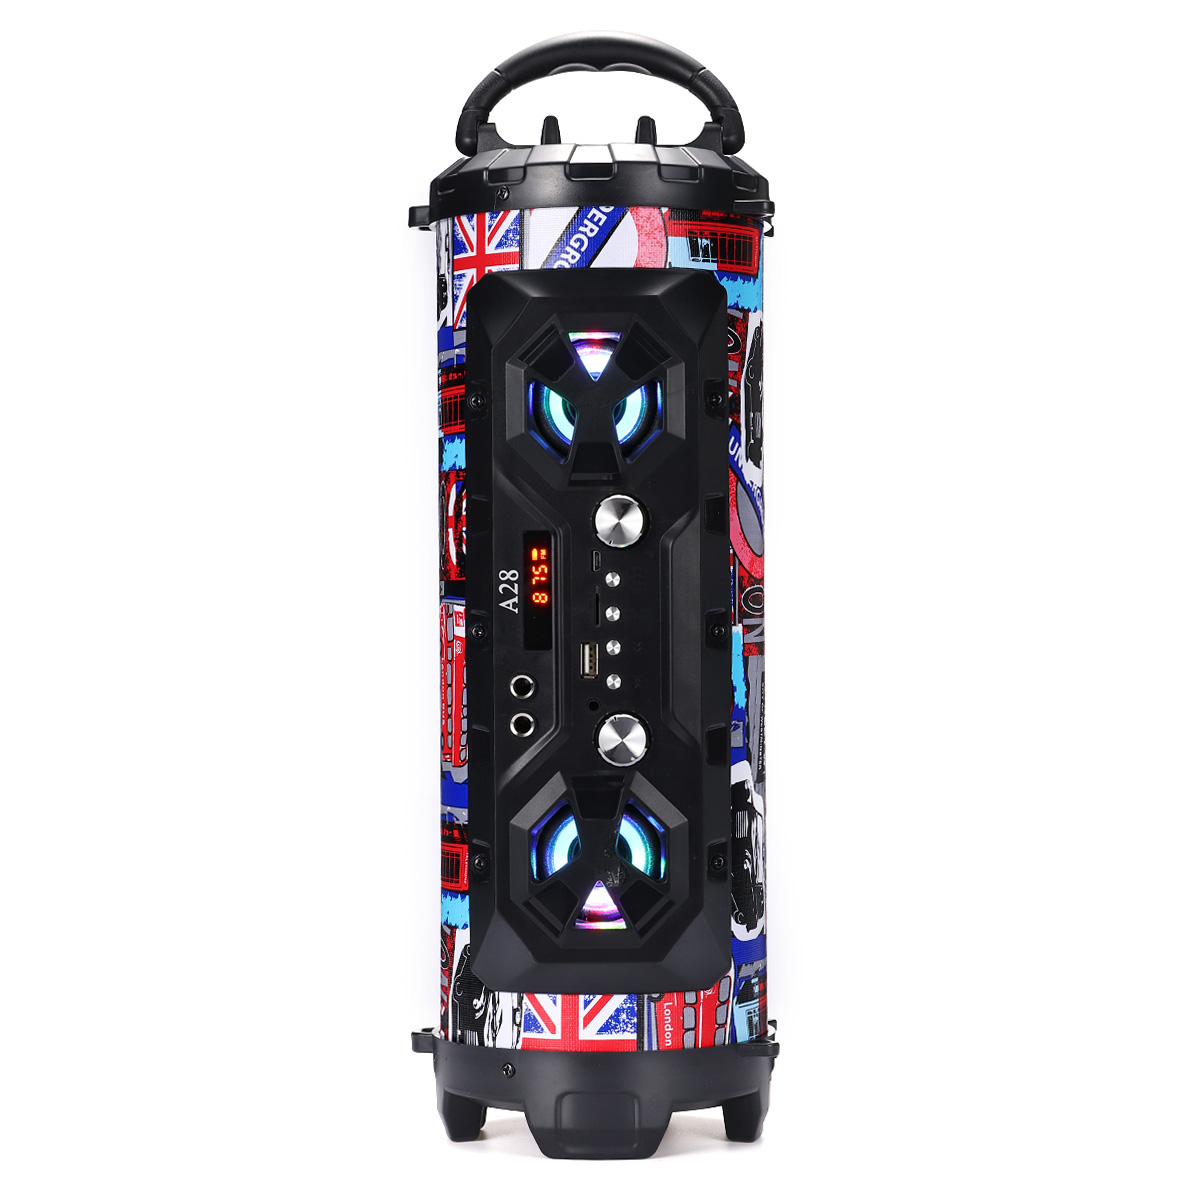 Unique Portable LED Wireless Portable bluetooth 4.2 Speaker Stereo Sound Super Bass HIFI AUX FM Subwoofer Loudspeaker ,RGB Colorful Lights, EQ, Booming Bass, Outdoor Speaker for Home, Party, Camping - image 4 of 8